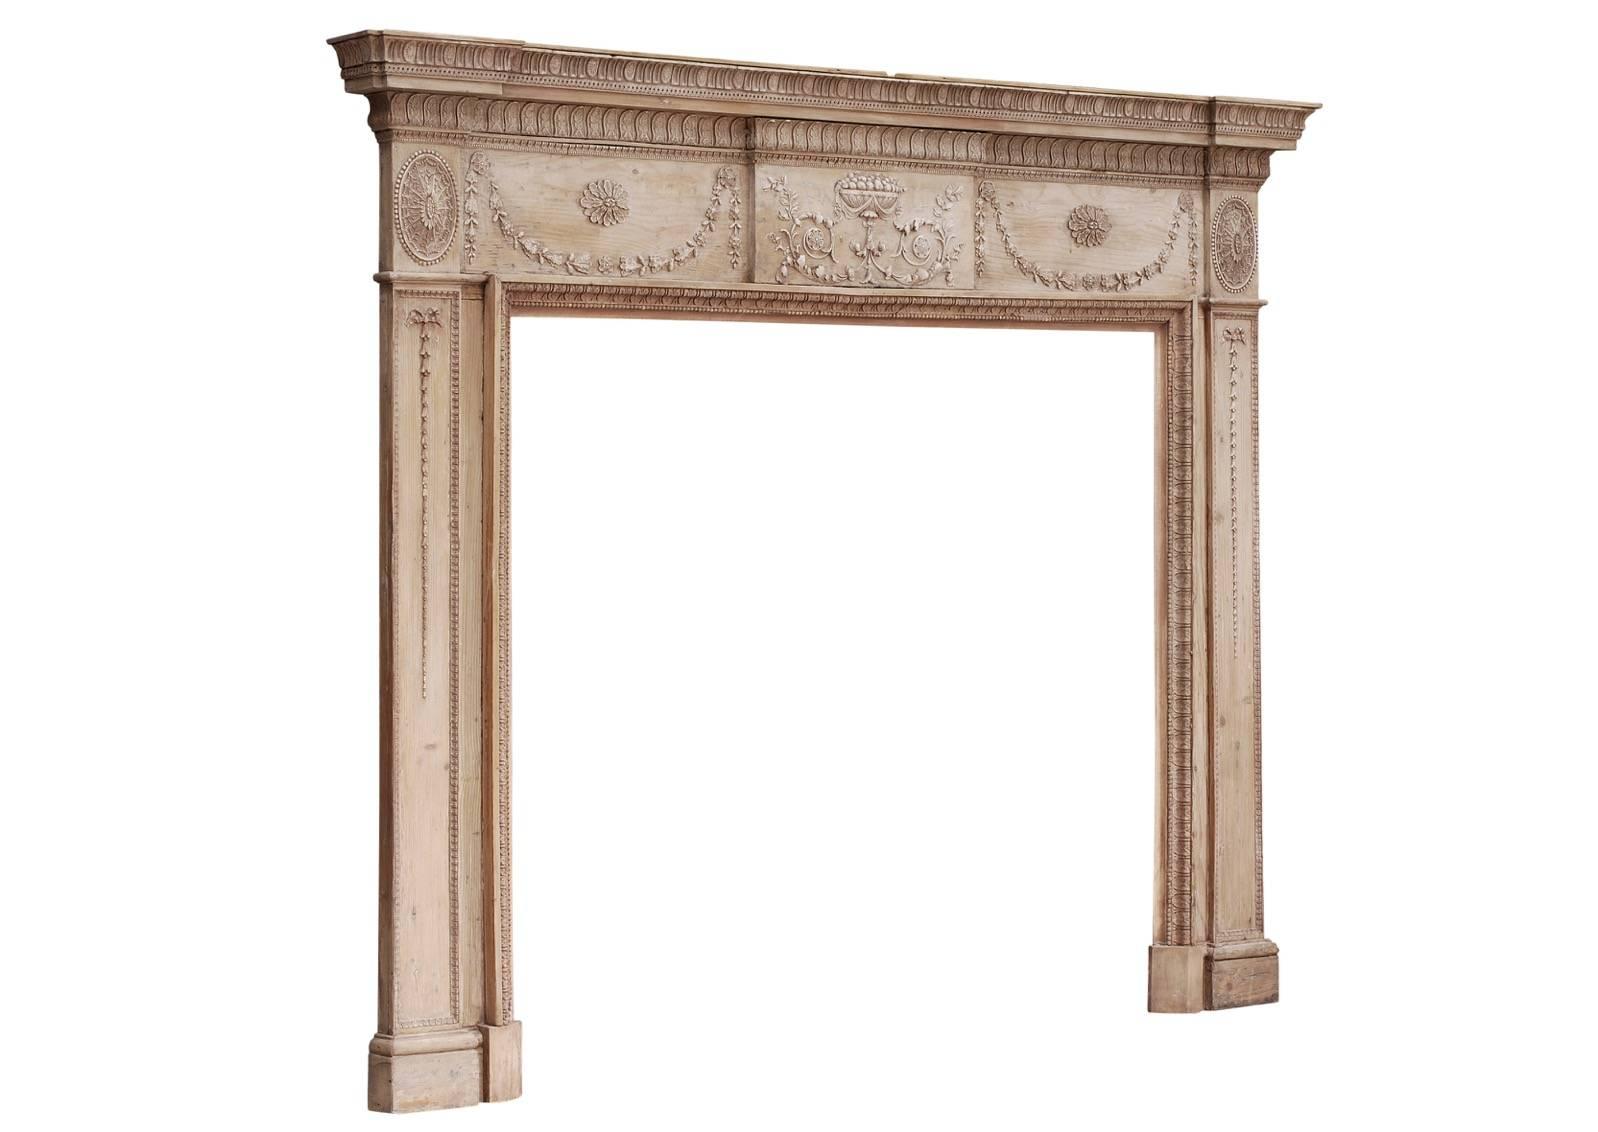 An 18th century pine and gesso fireplace. The centre with urn, fruit, scrolls, pateras and foliage. The frieze panels with swags, the side blockings with oval paterae. The jambs with Fine bellflower and ribbon drops. The shelf with acanthus leaf,